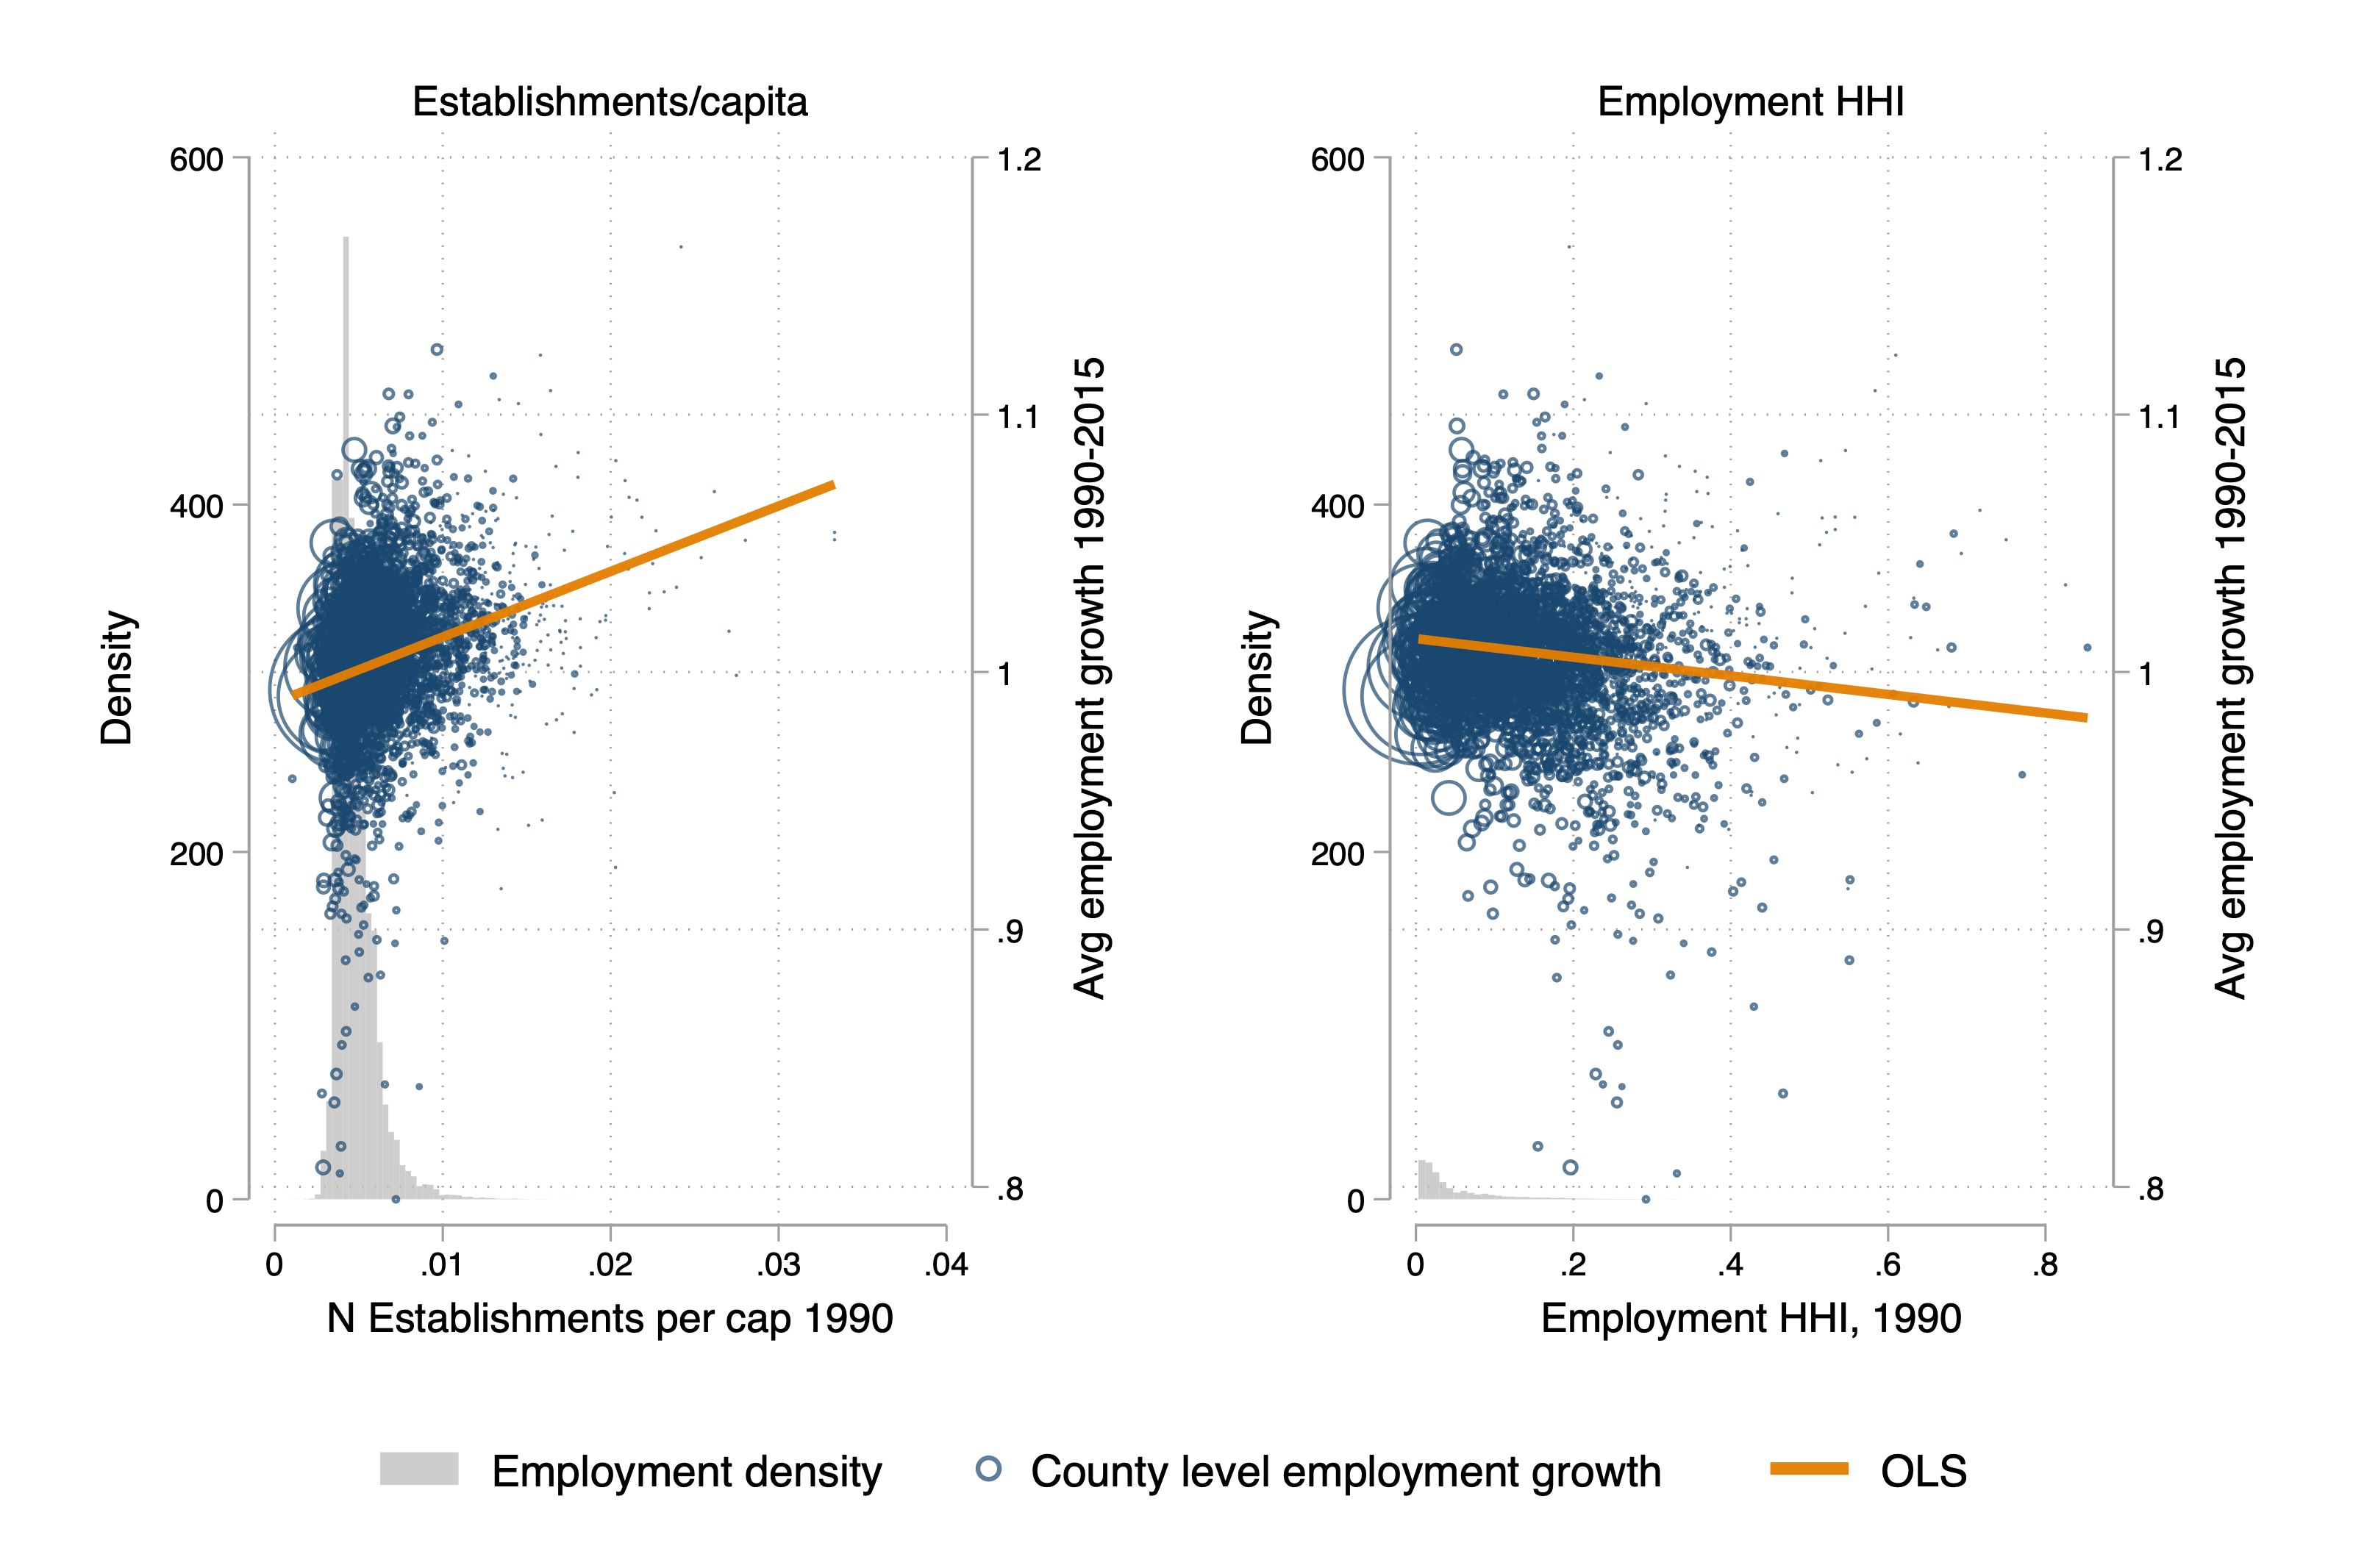 Competition and employment growth